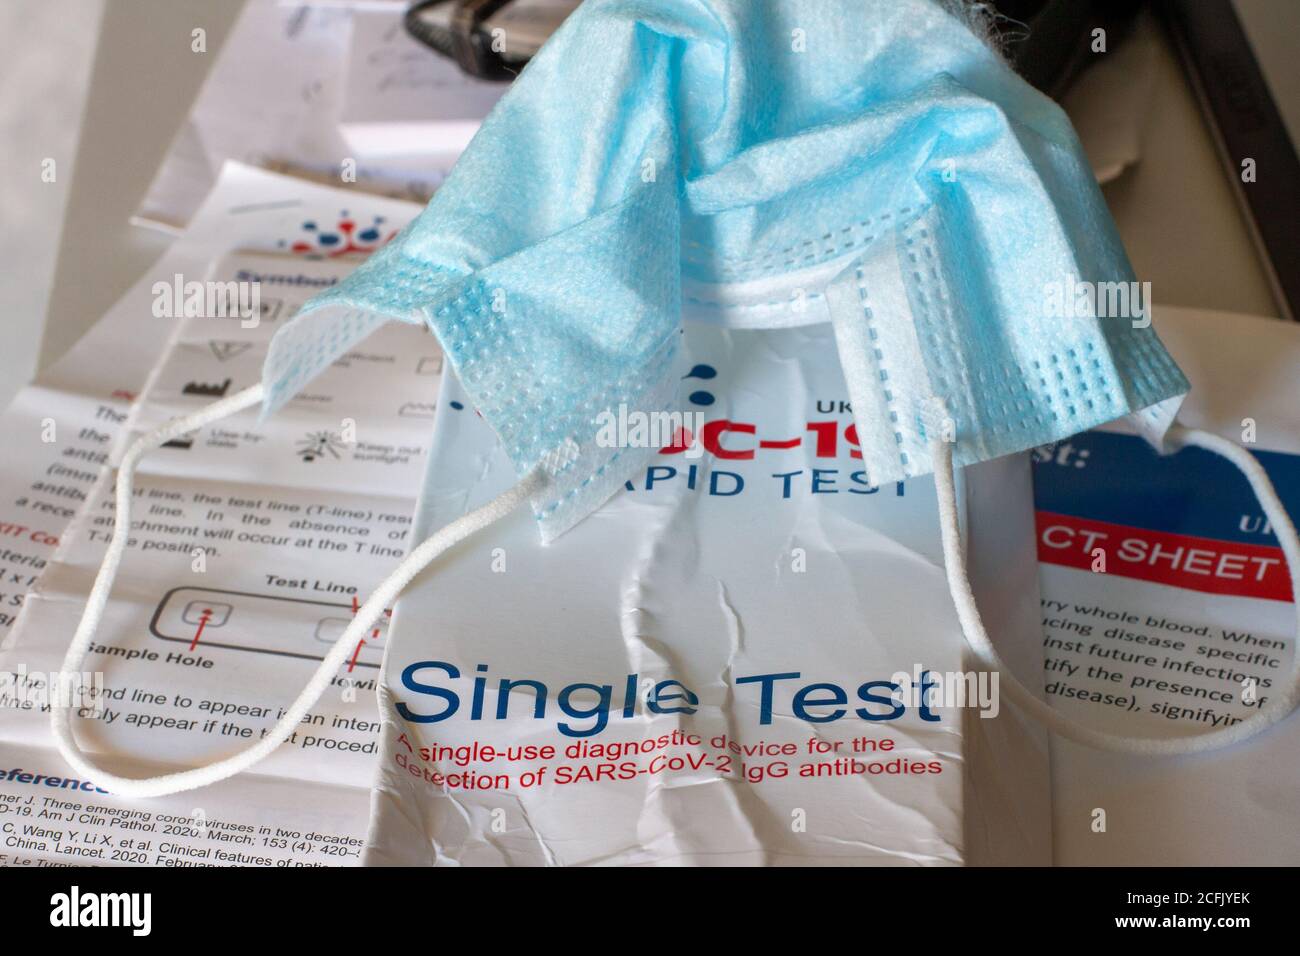 Bangor, Northern Ireland, UK, 6 September 2020: Packaging from a used Covid 19 Antibodies Test kit. The test kit is a single use diagnostic device for the detection os SARS-CoV-2 lgG antibodies Stock Photo